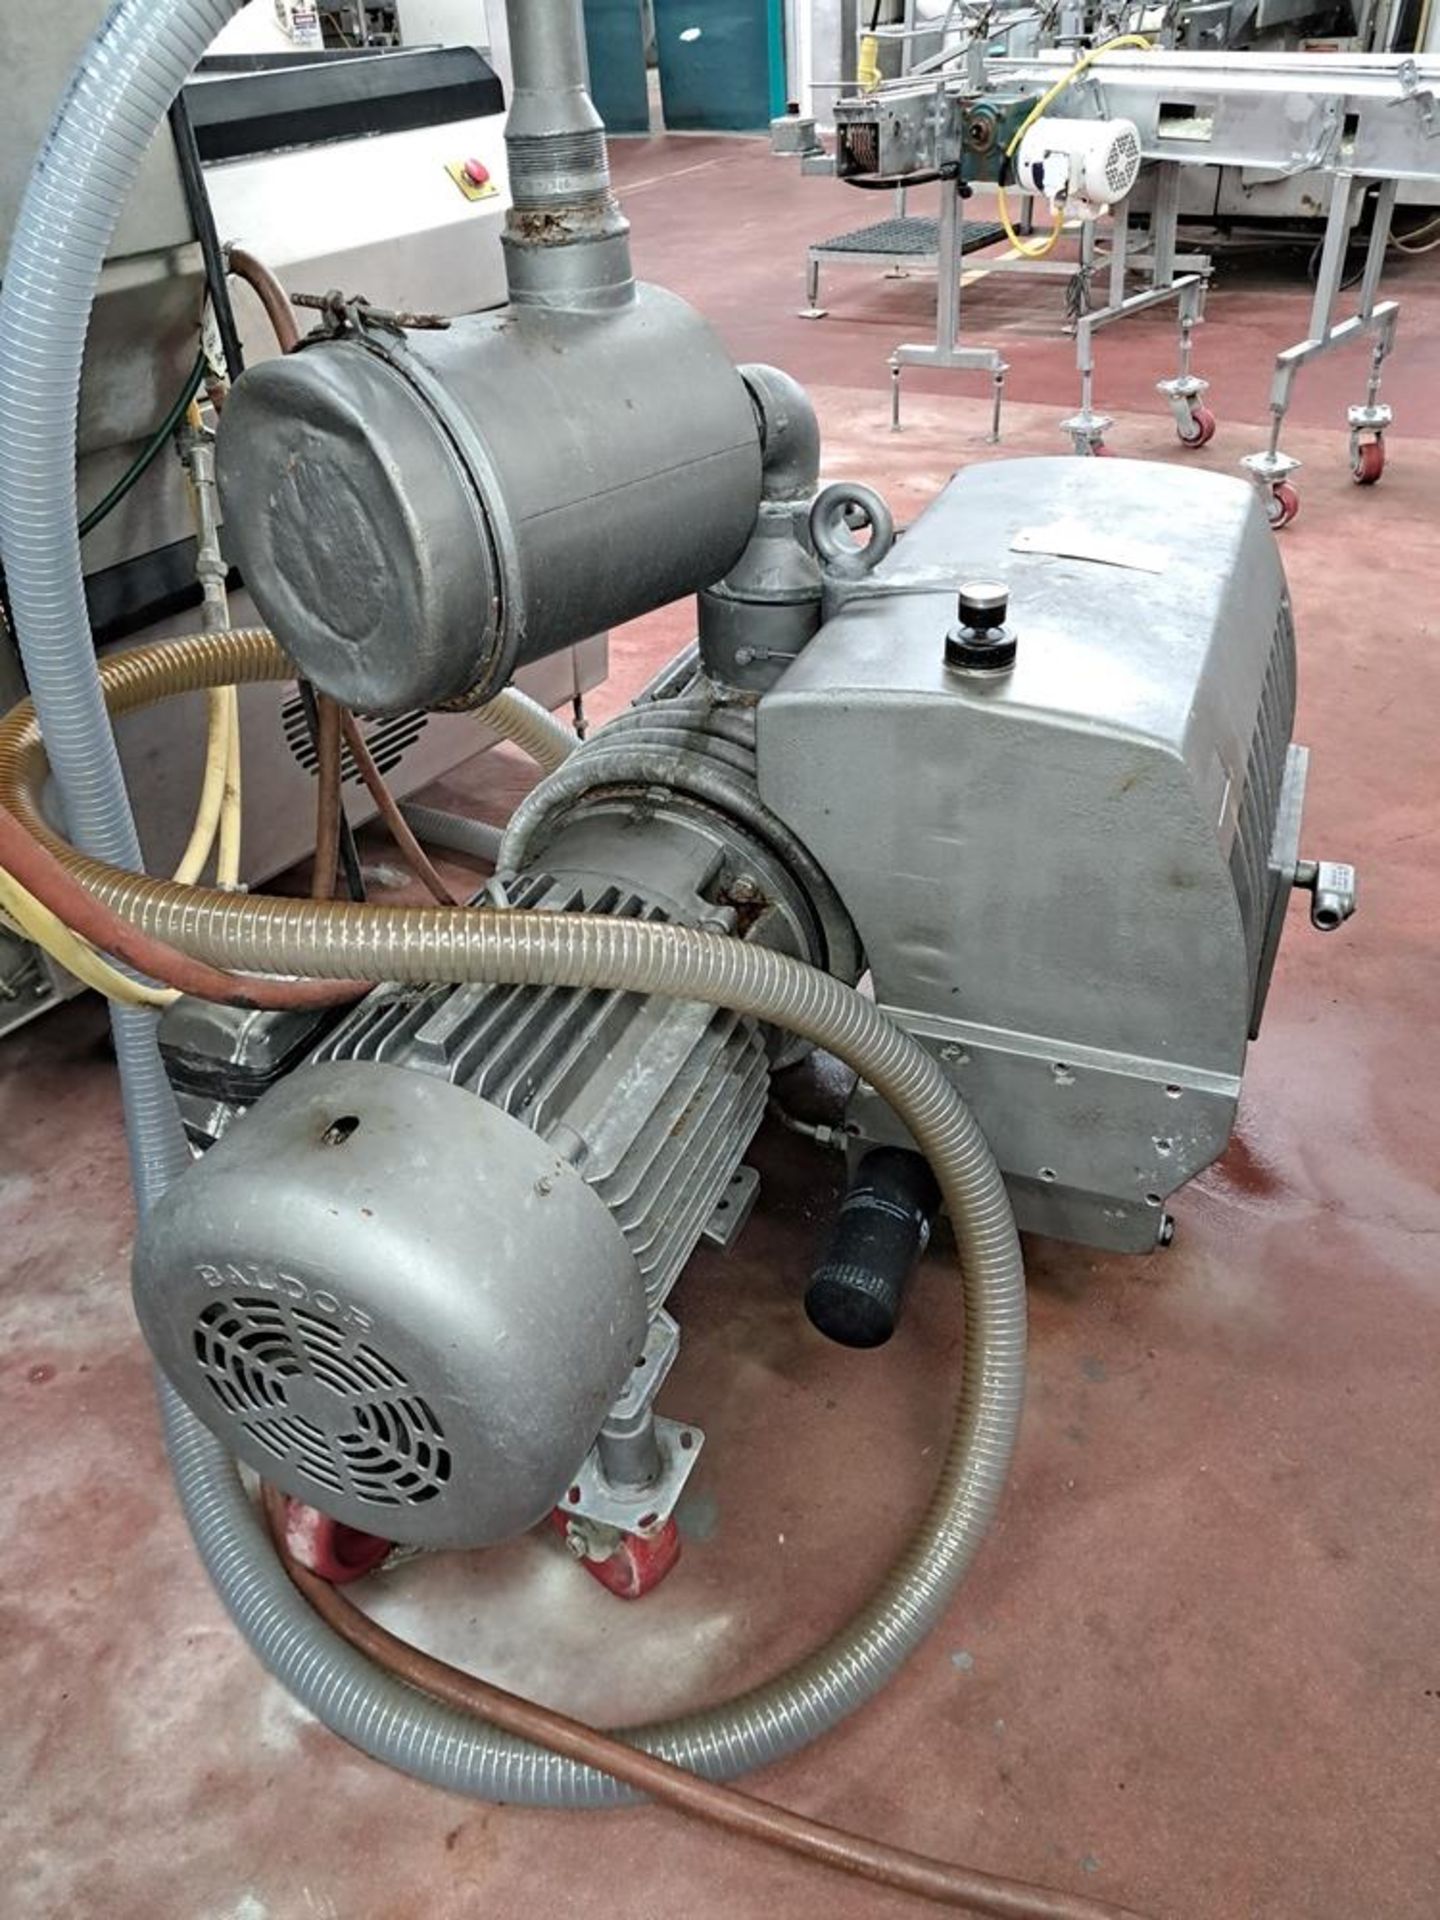 Busch Mdl. 400 Vacuum Pump, 20 h.p., 230/460 volts, 3 phase: Required Loading Fee $250.00, Rigger- - Image 2 of 2